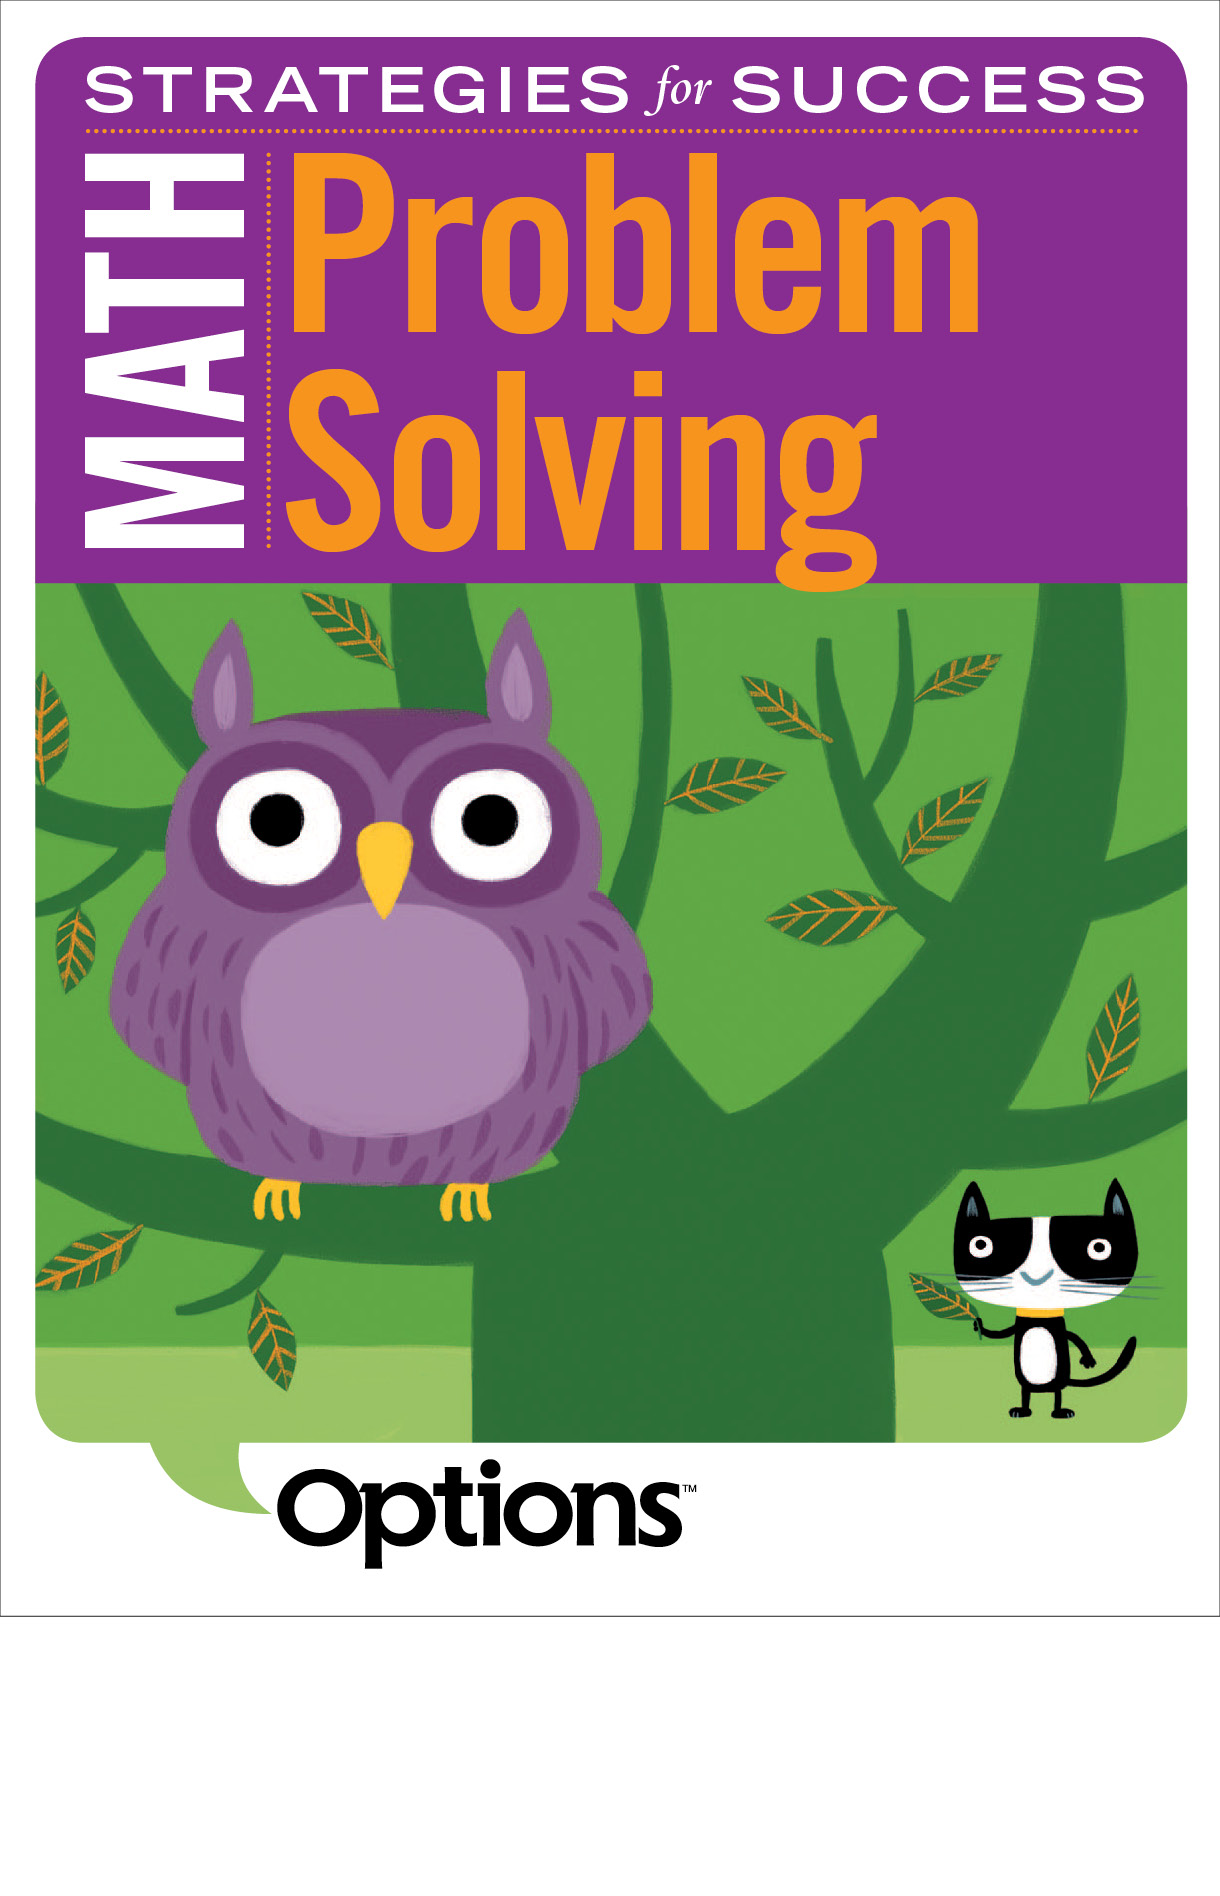 Book cover of Math Strategies for Success, Problem Solving. It has an owl in a tree and cat standing on the ground.